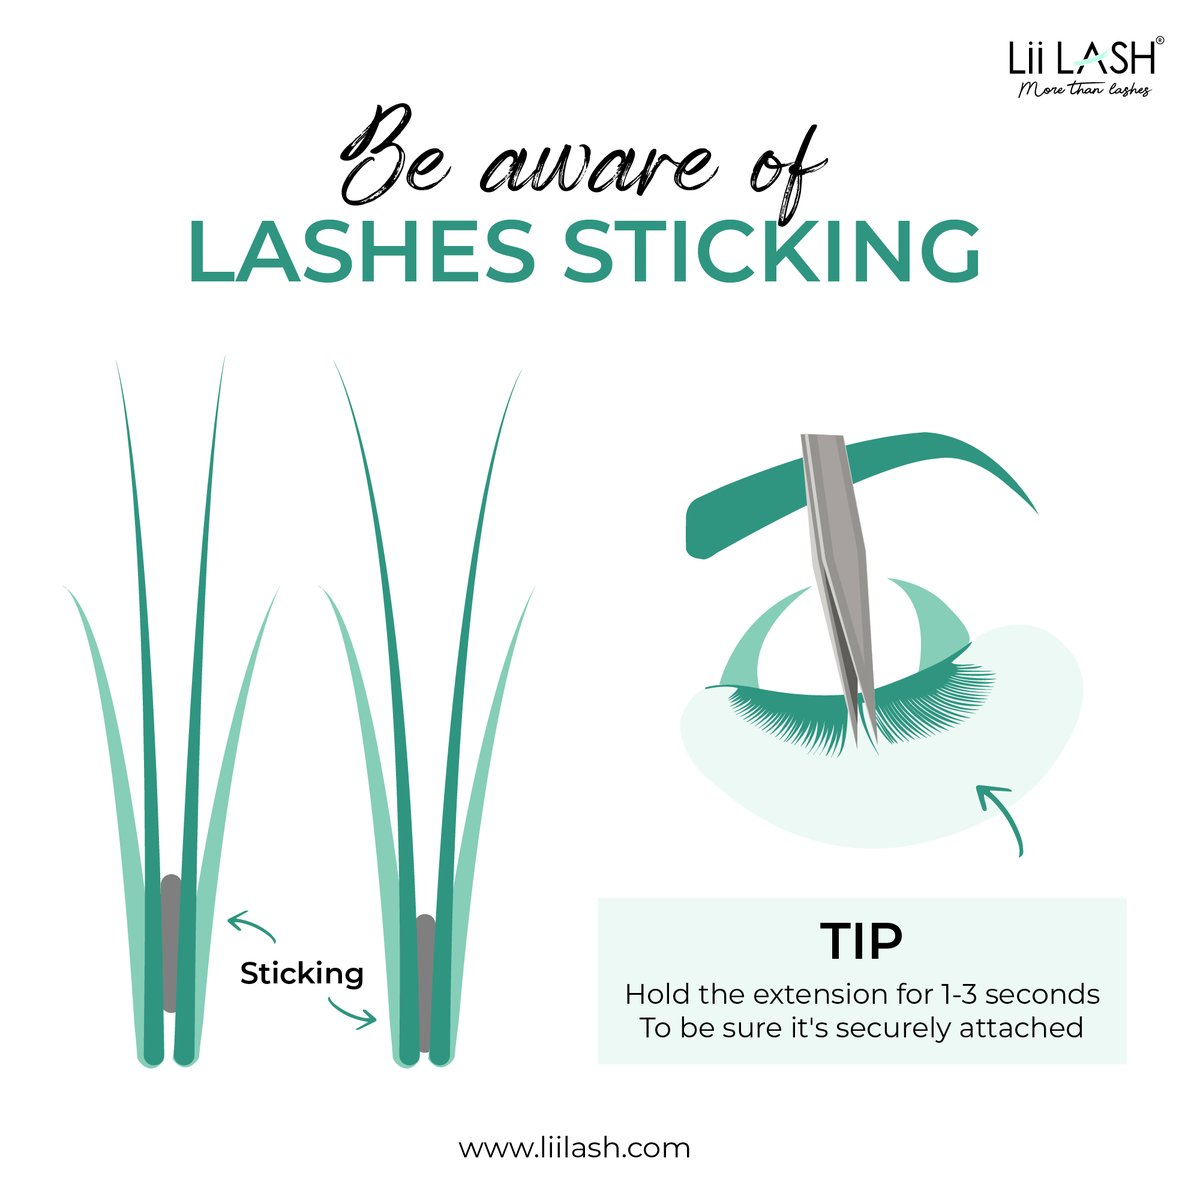 Sticking is what happens when you do not do or do the wrong isolation. This condition will cause pain and uncomfortable feelings for clients 😢
So what is the tip here?
👉👉👉 Hold your extension for 1-3 seconds, and wait for it to be securely attached
#lashsupplies #lashtips